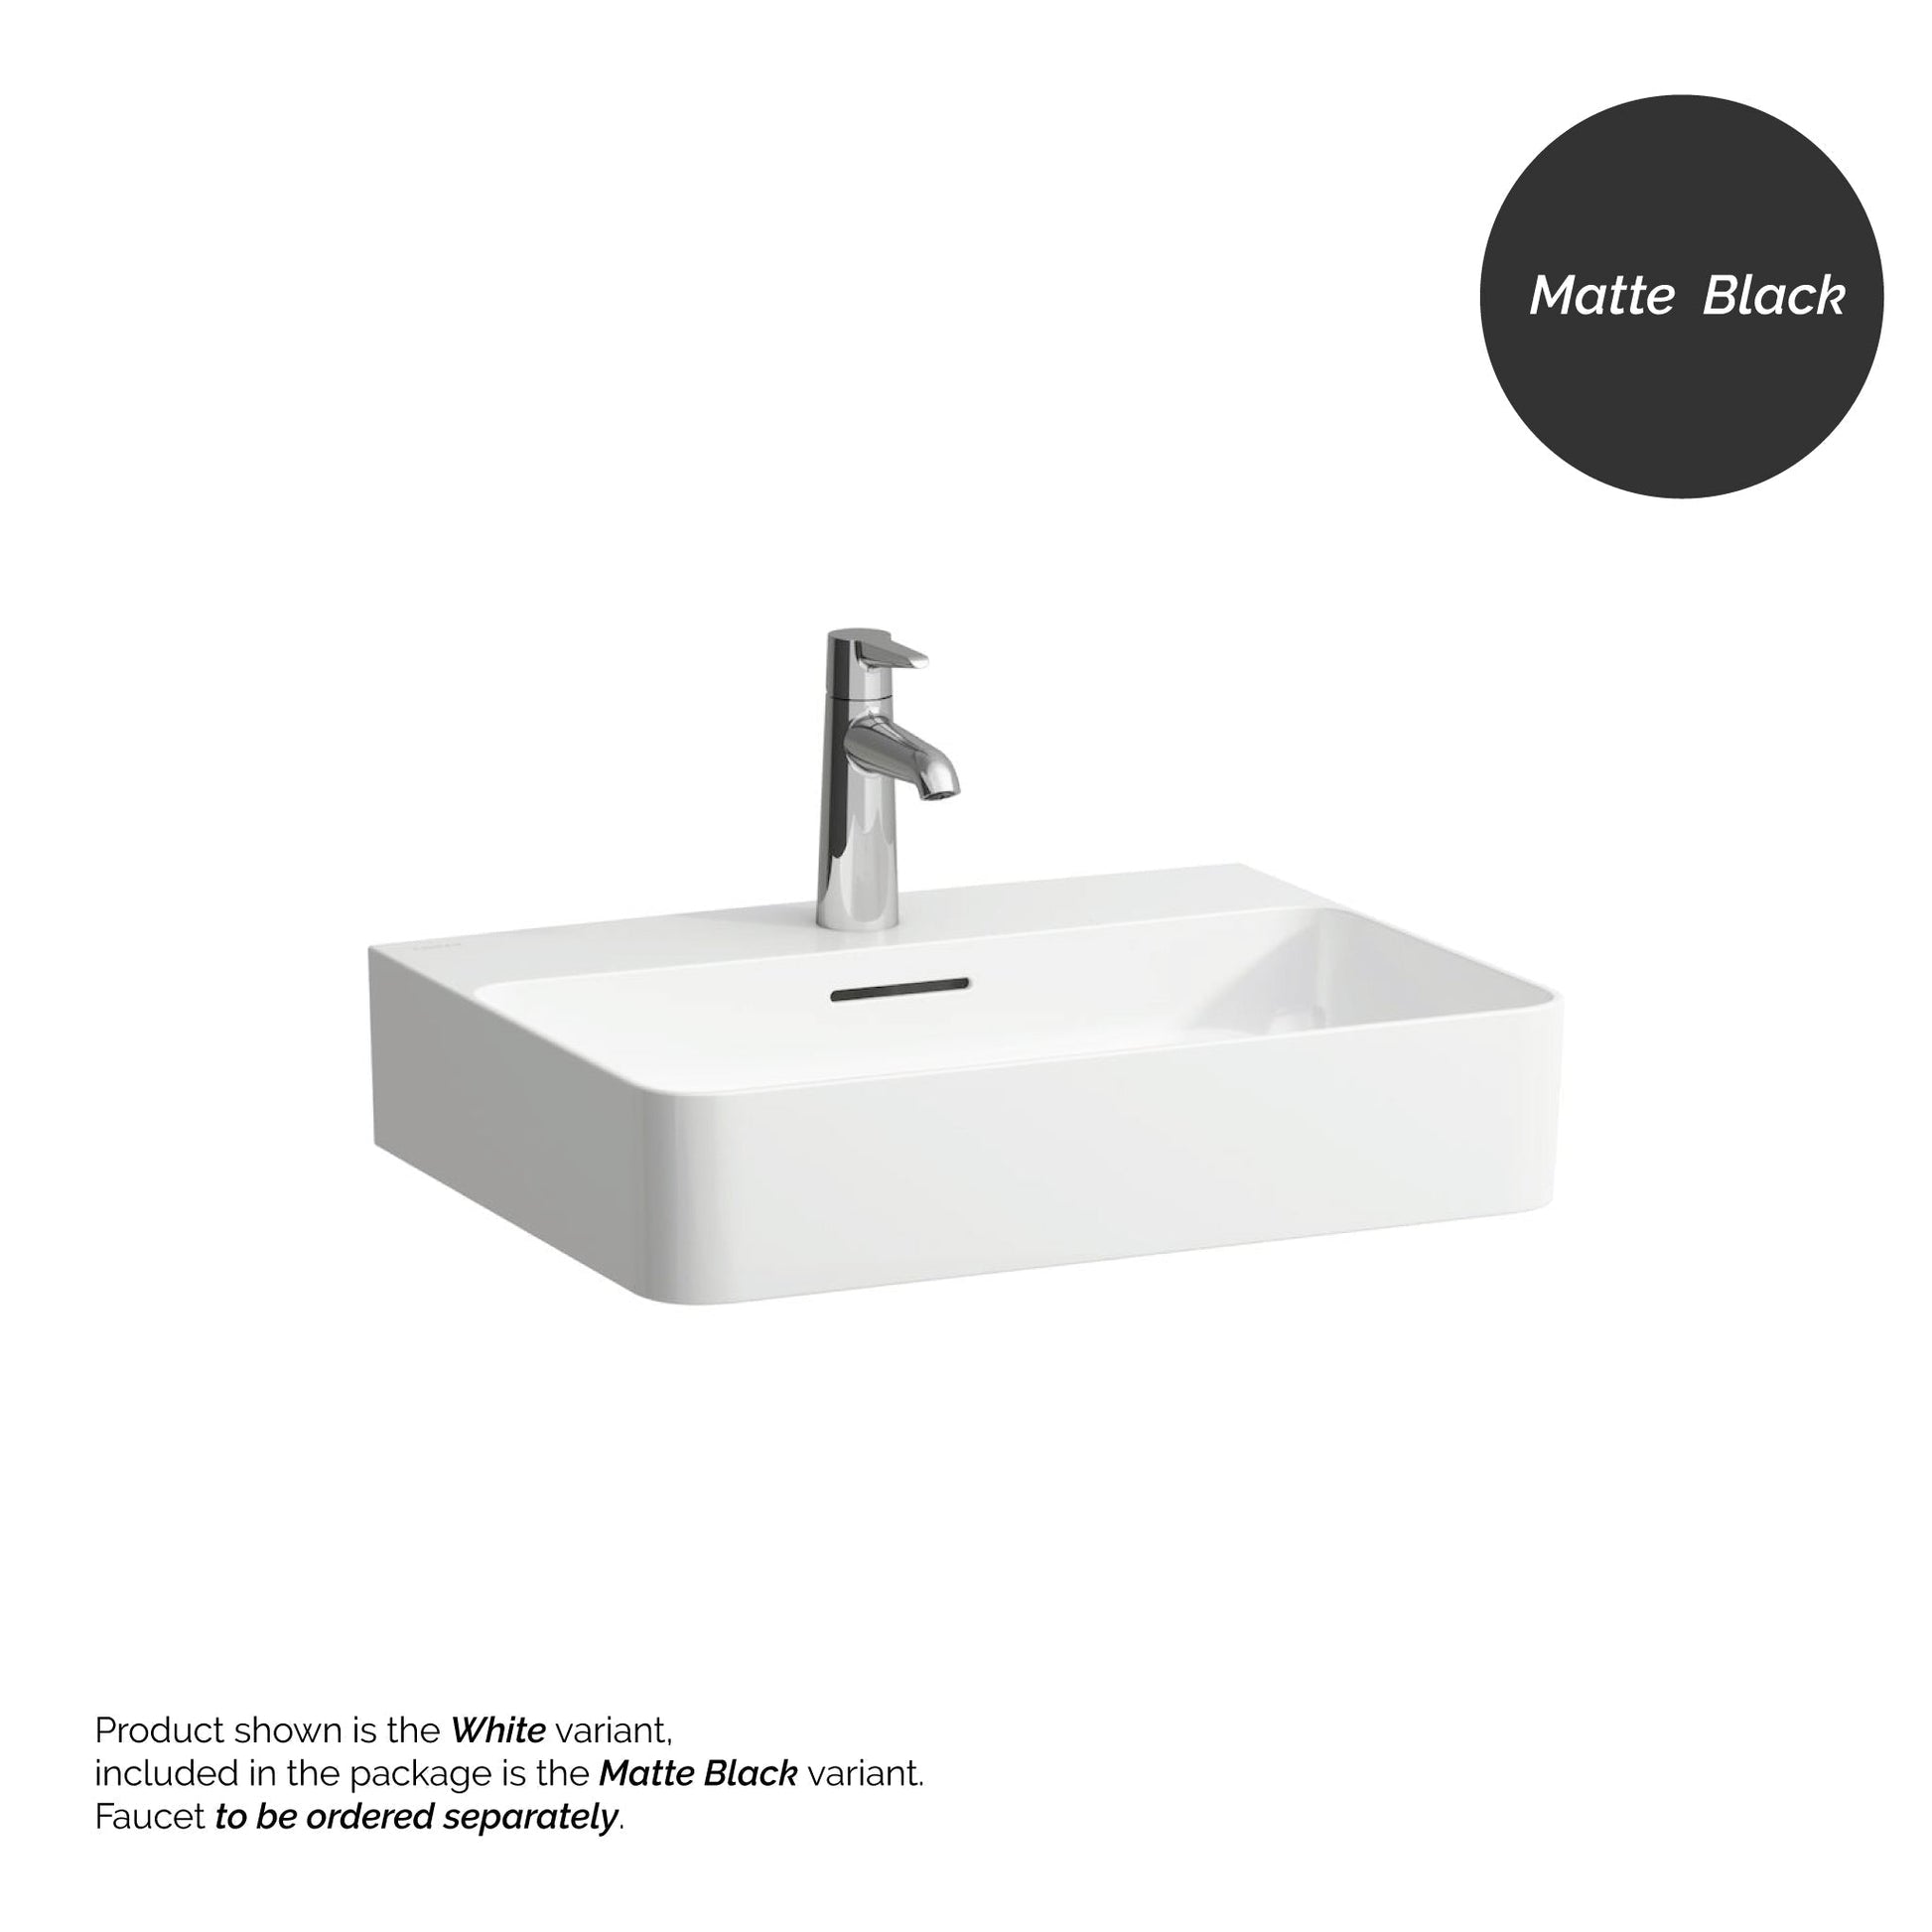 Laufen Val 22" x 17" Matte Black Ceramic Wall-Mounted Bathroom Sink With Faucet Hole